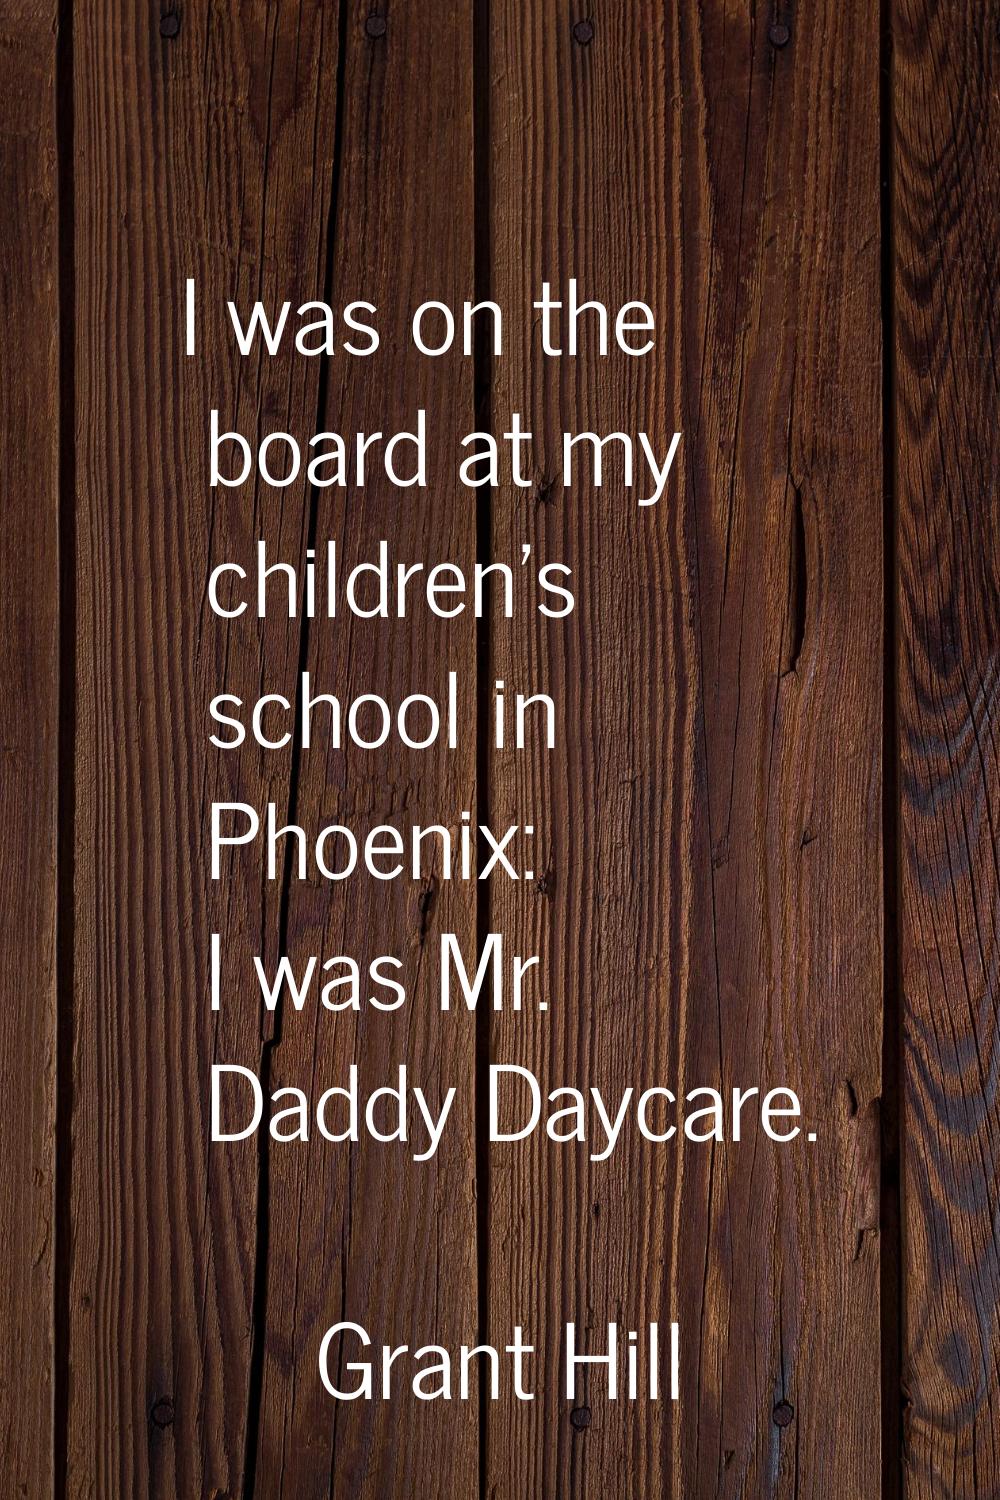 I was on the board at my children's school in Phoenix: I was Mr. Daddy Daycare.